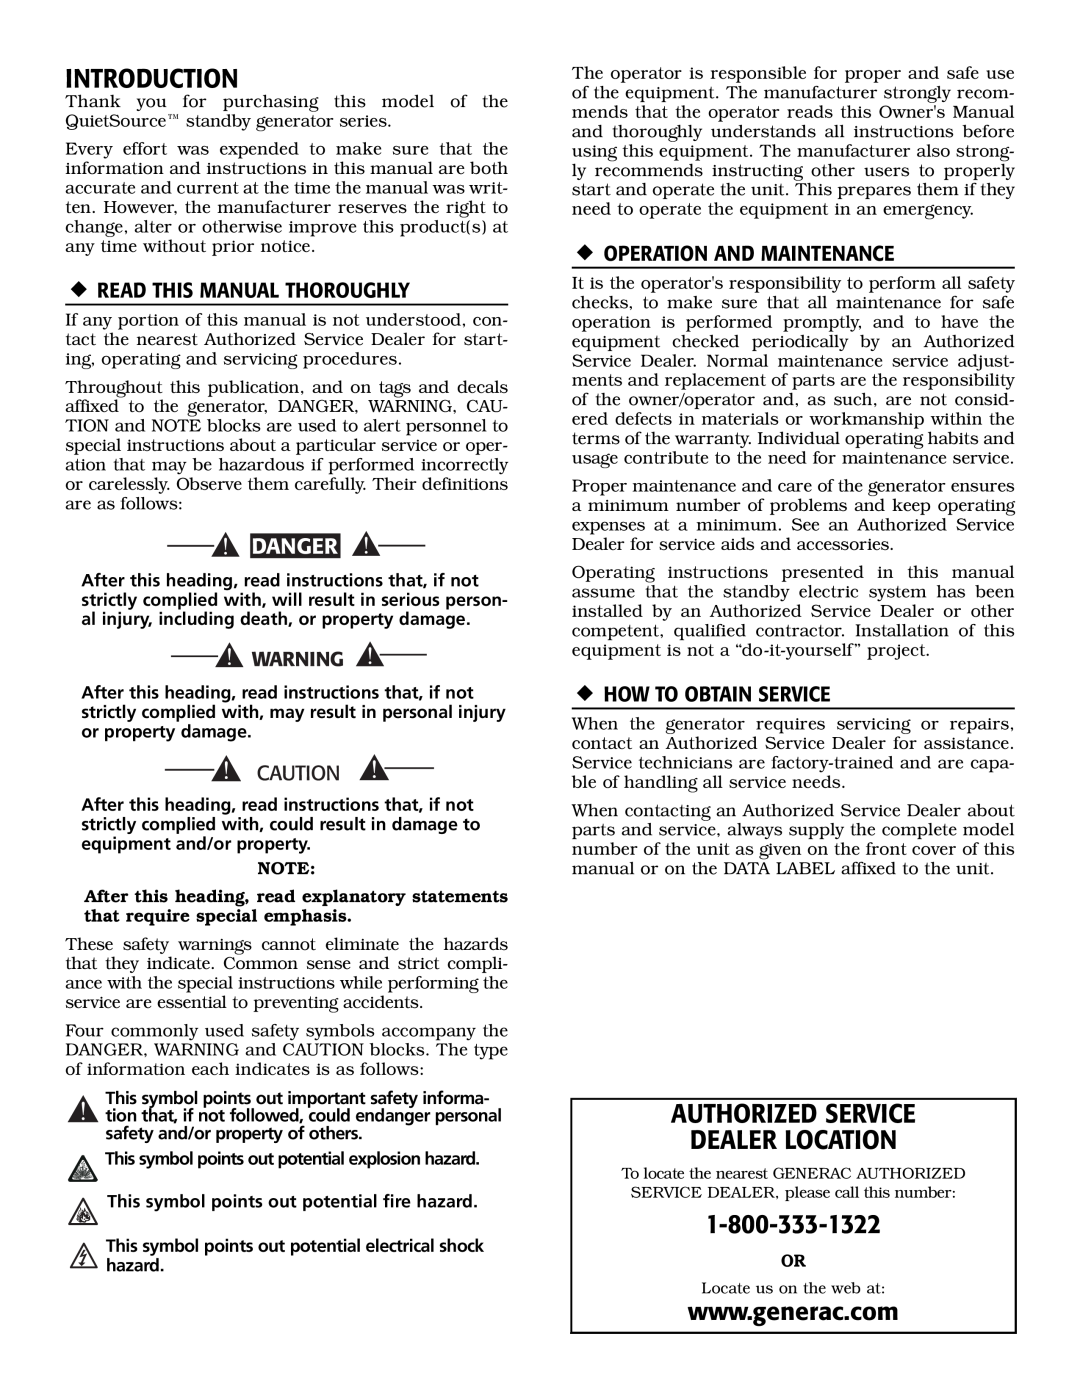 Generac 005028-0 owner manual Introduction, Authorized Service Dealer Location, ‹ Read This Manual Thoroughly, Danger 